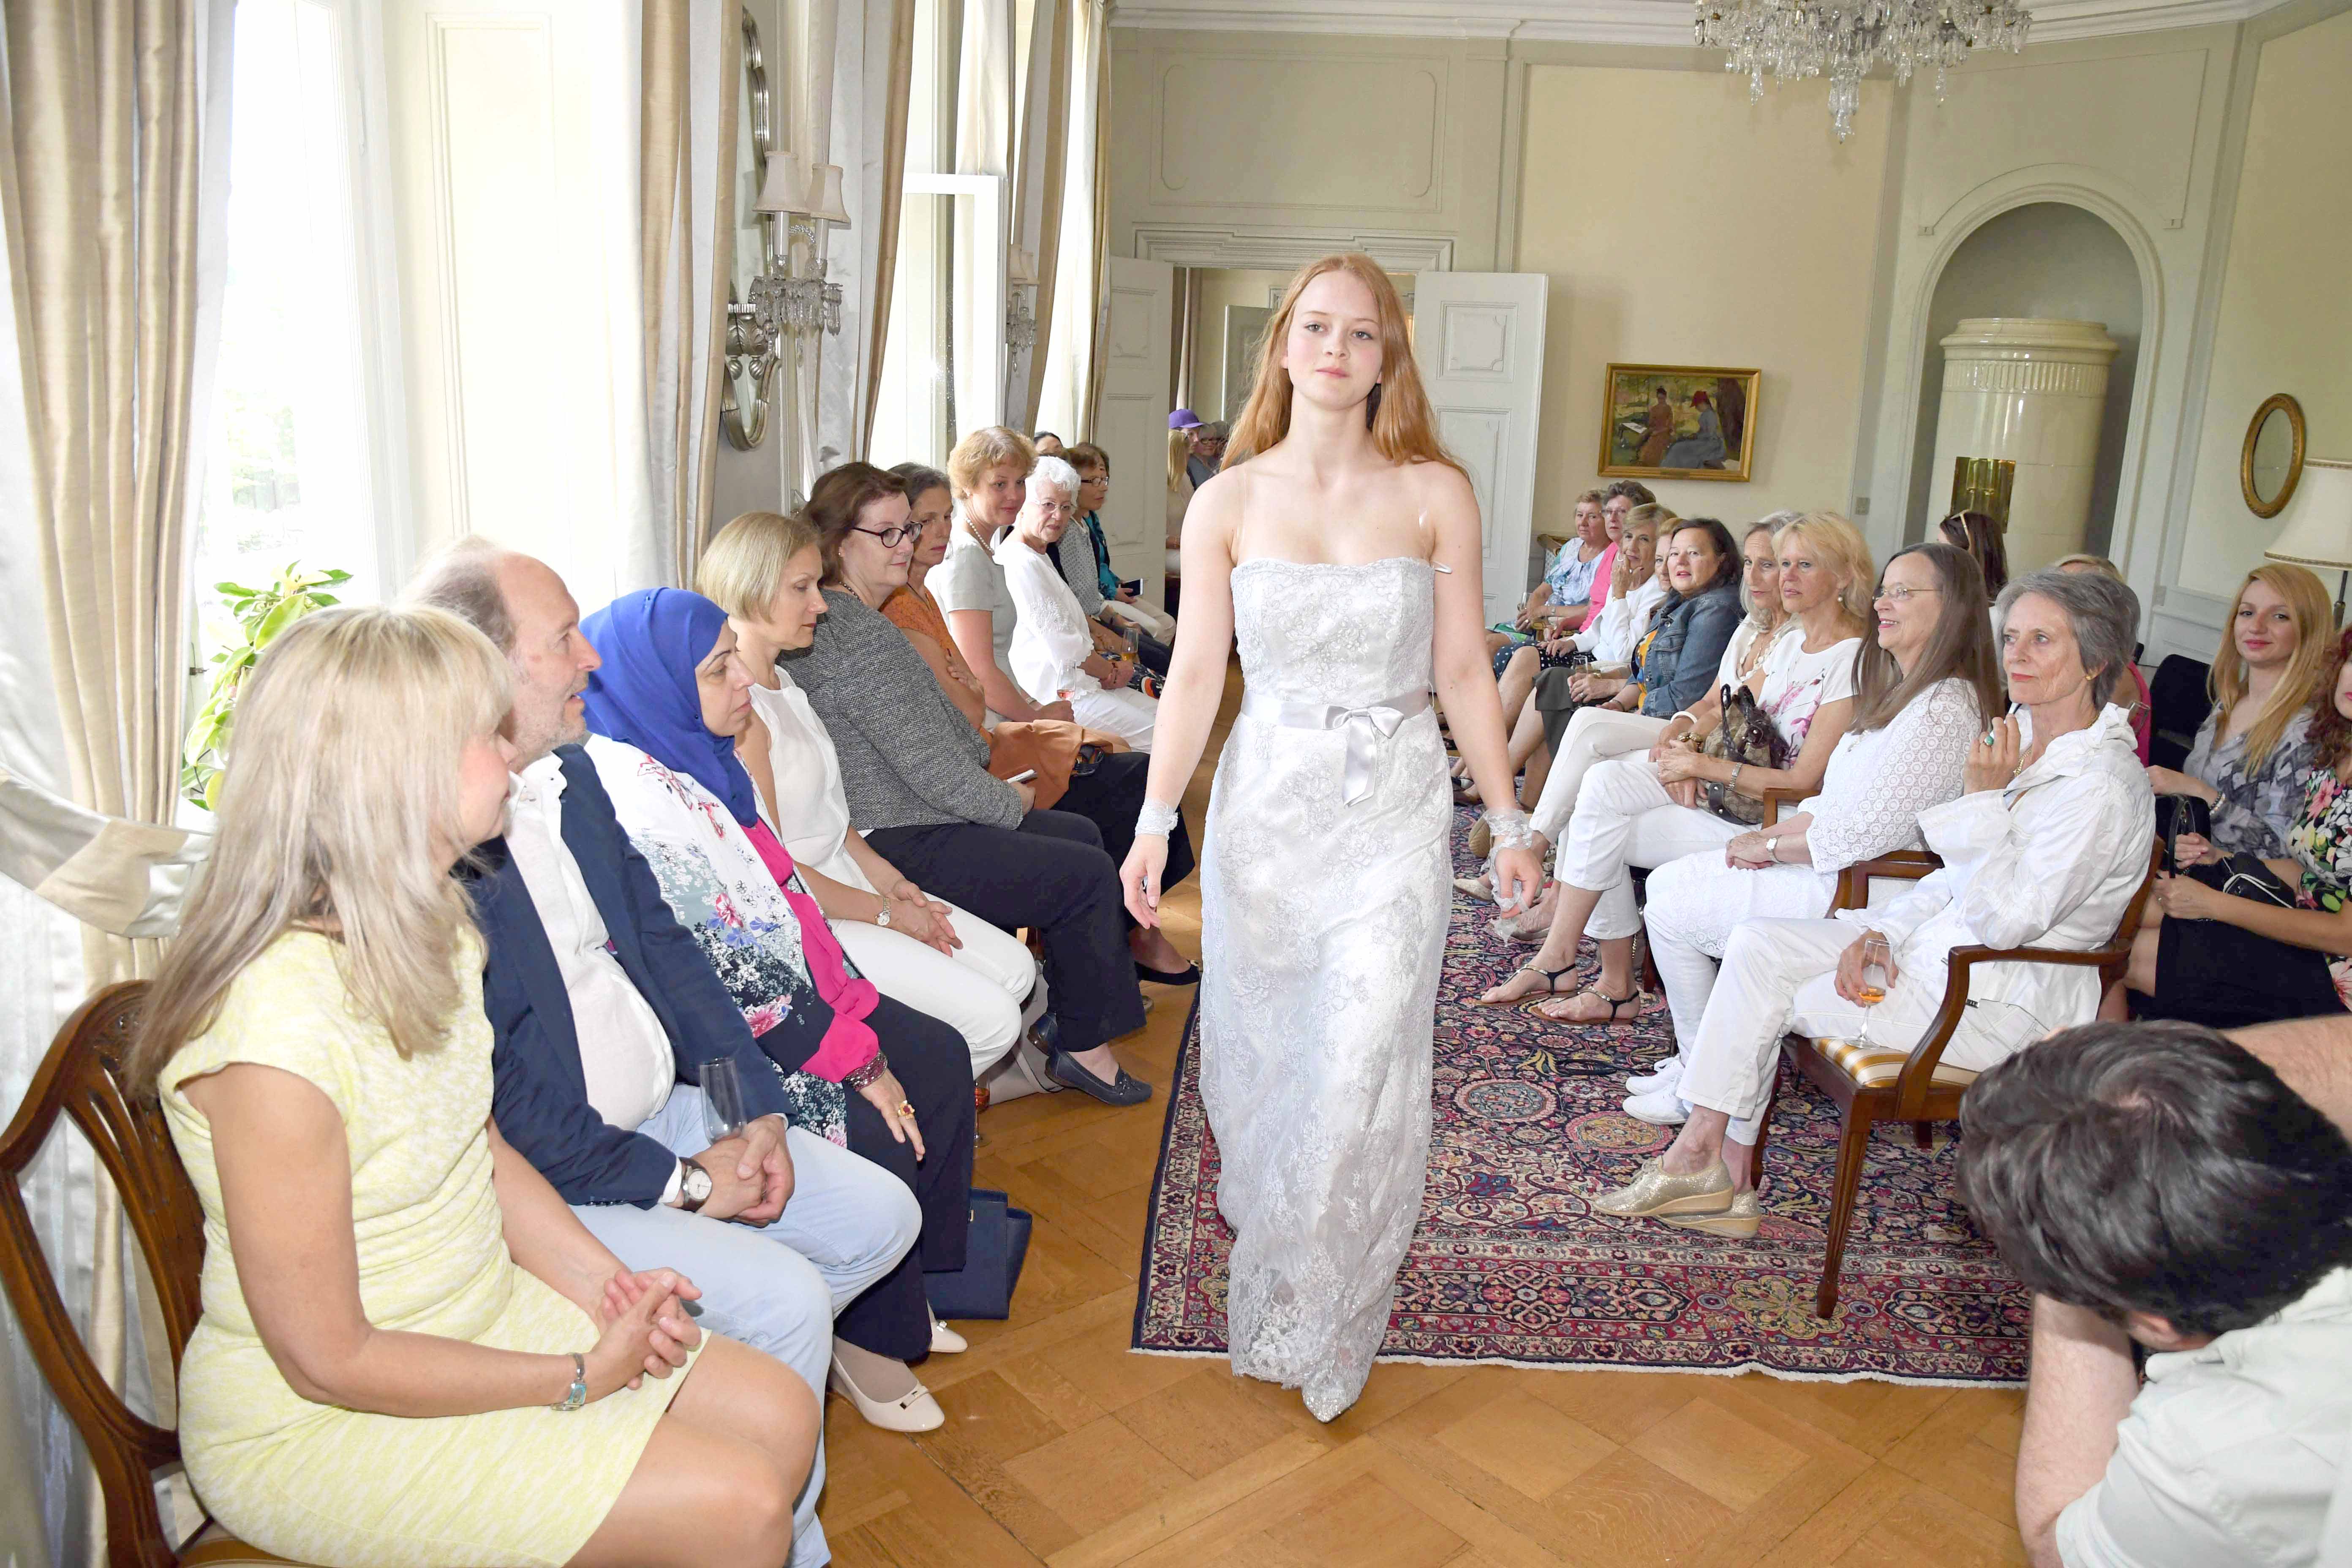 About Town: Fab frocks at Finnish fashion fixture